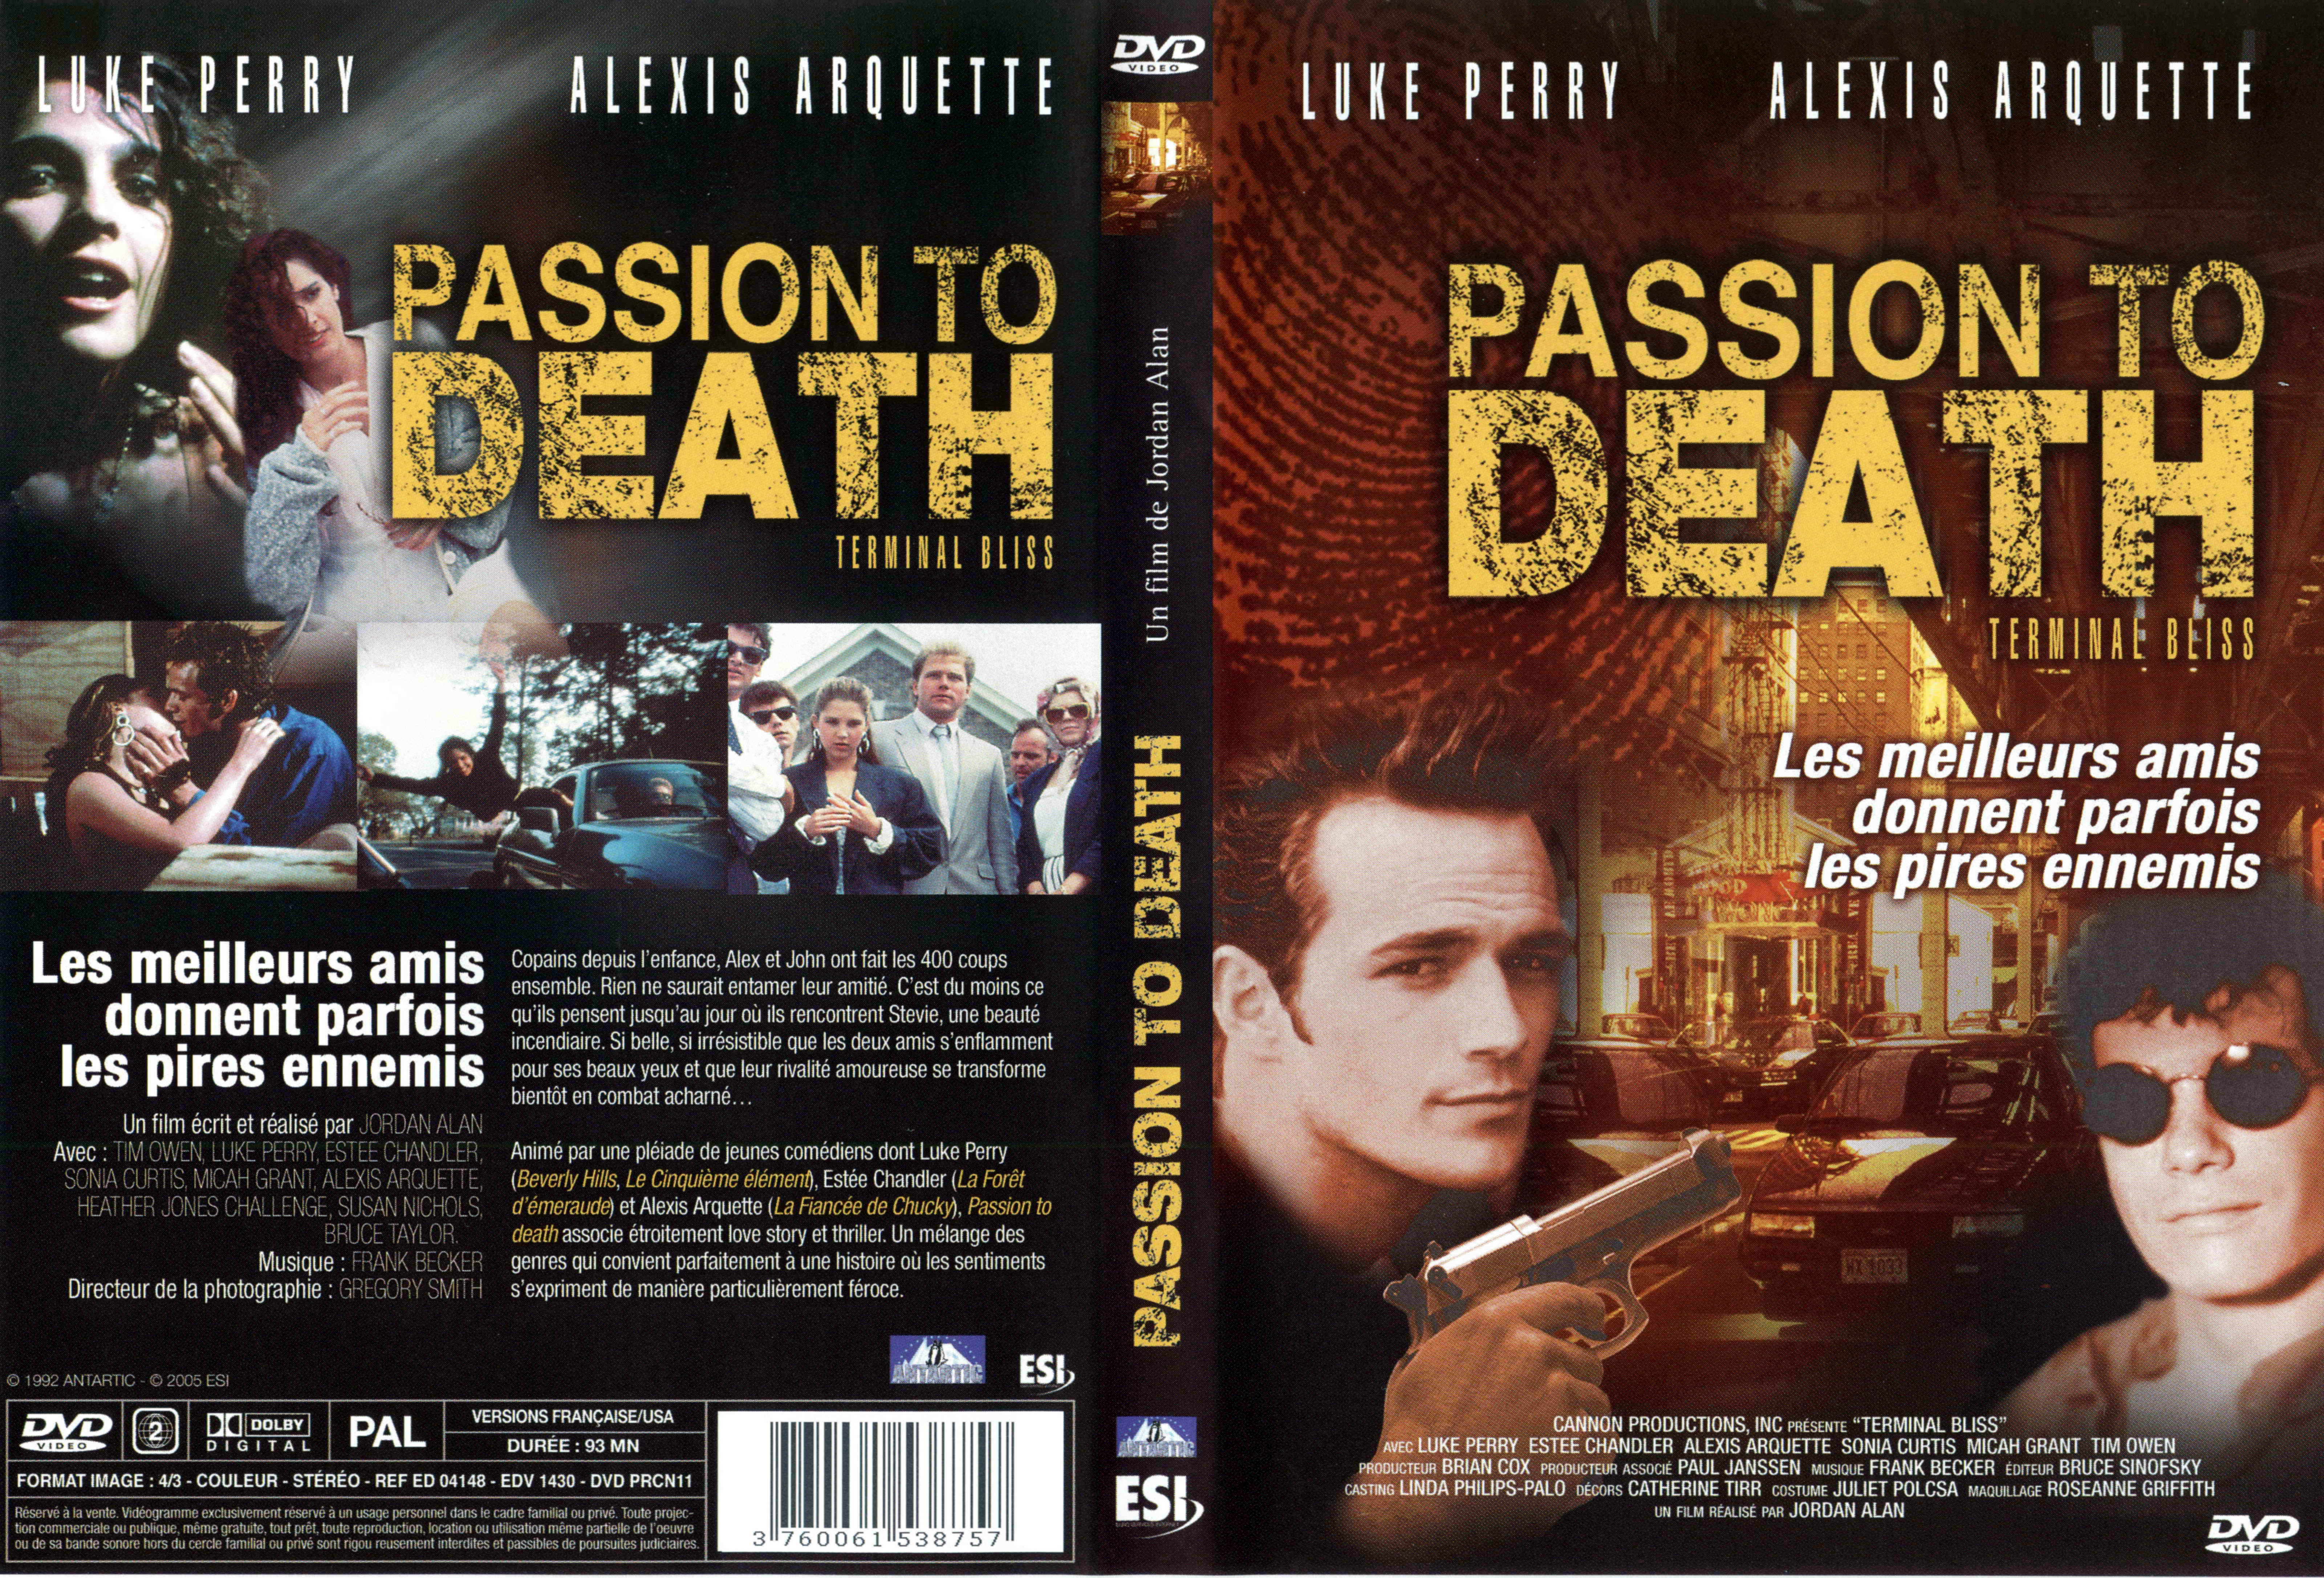 Jaquette DVD Passion to death